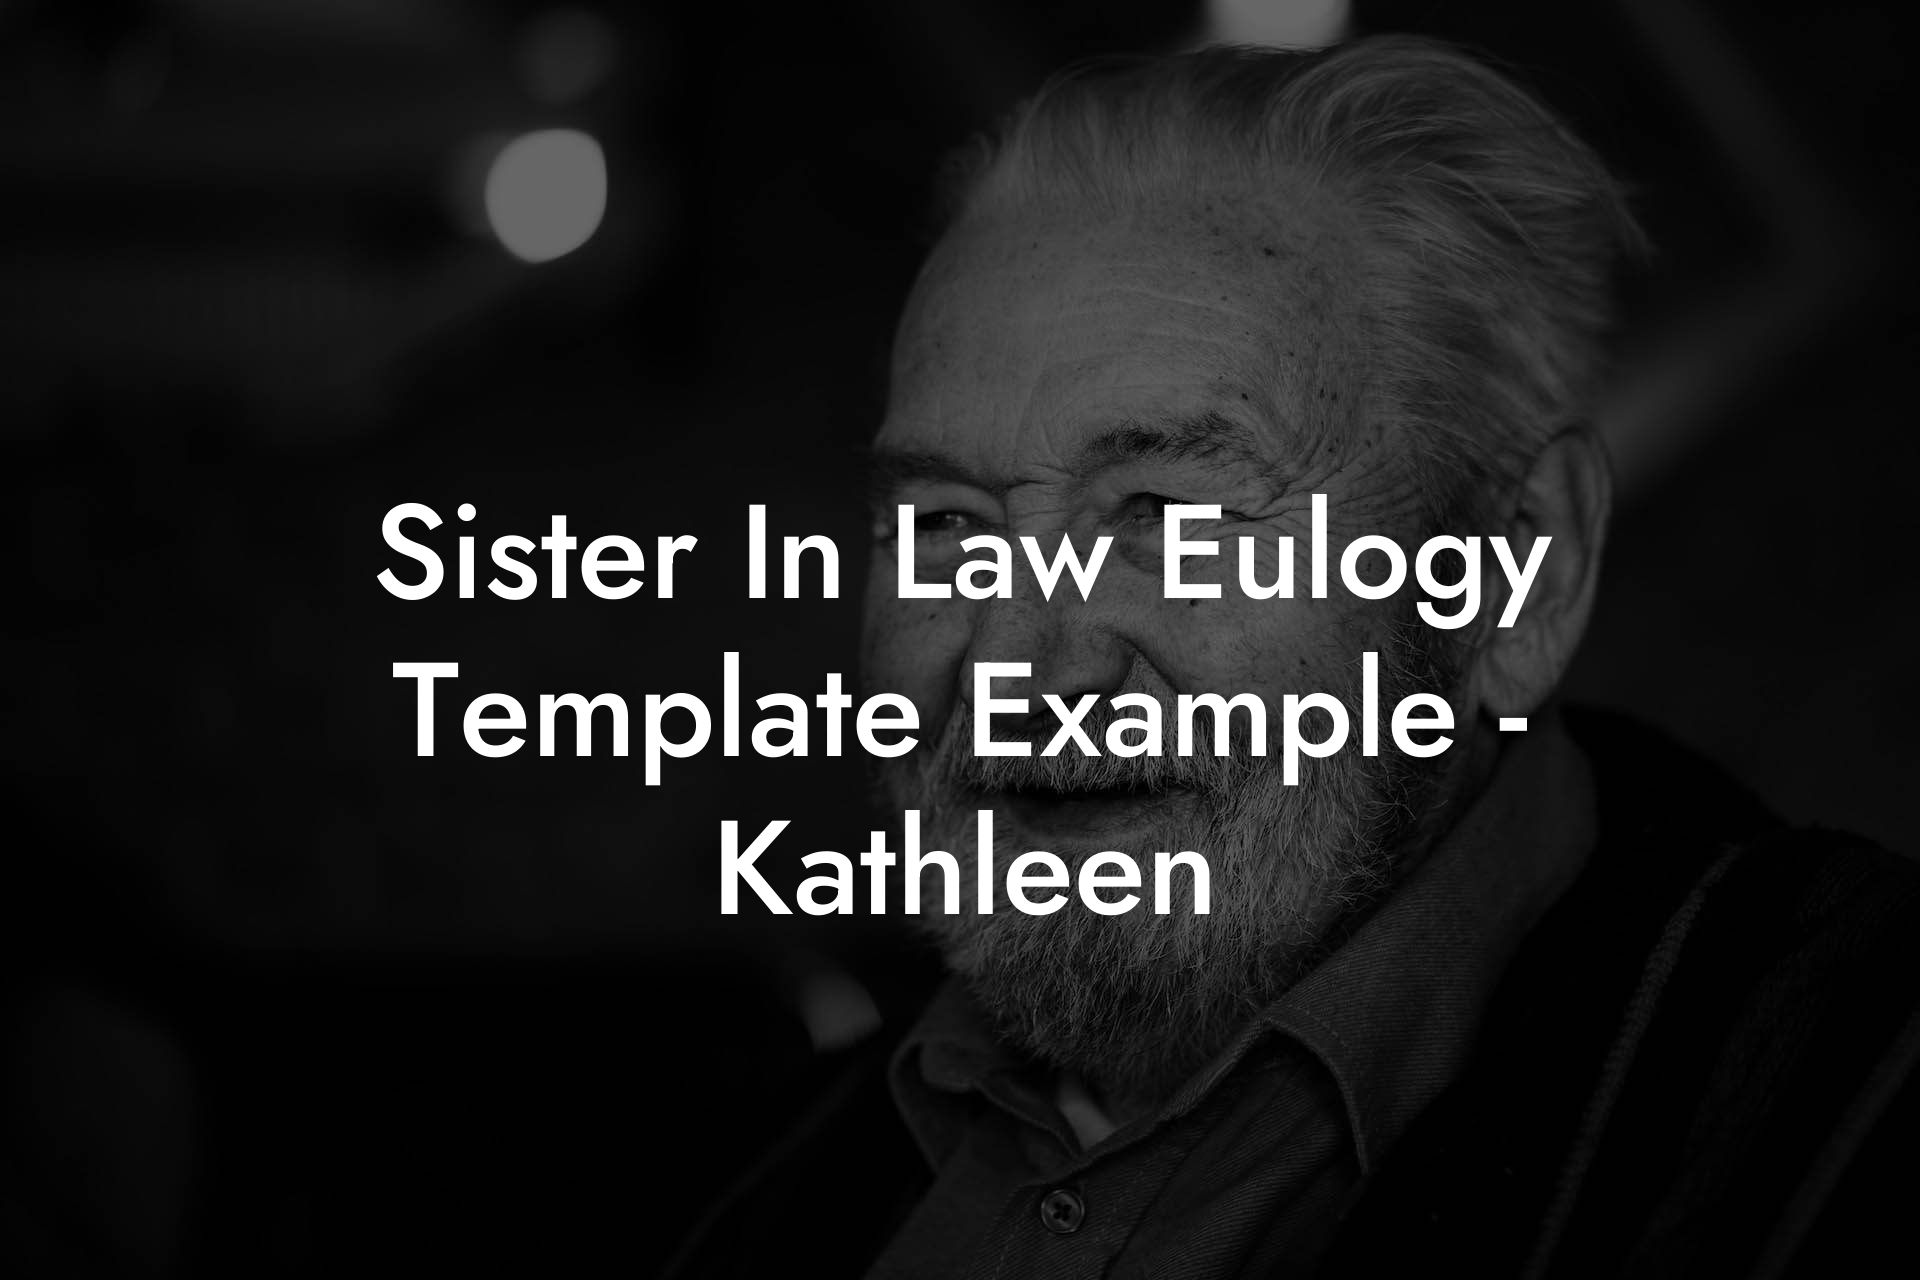 Sister In Law Eulogy Template Example - Kathleen